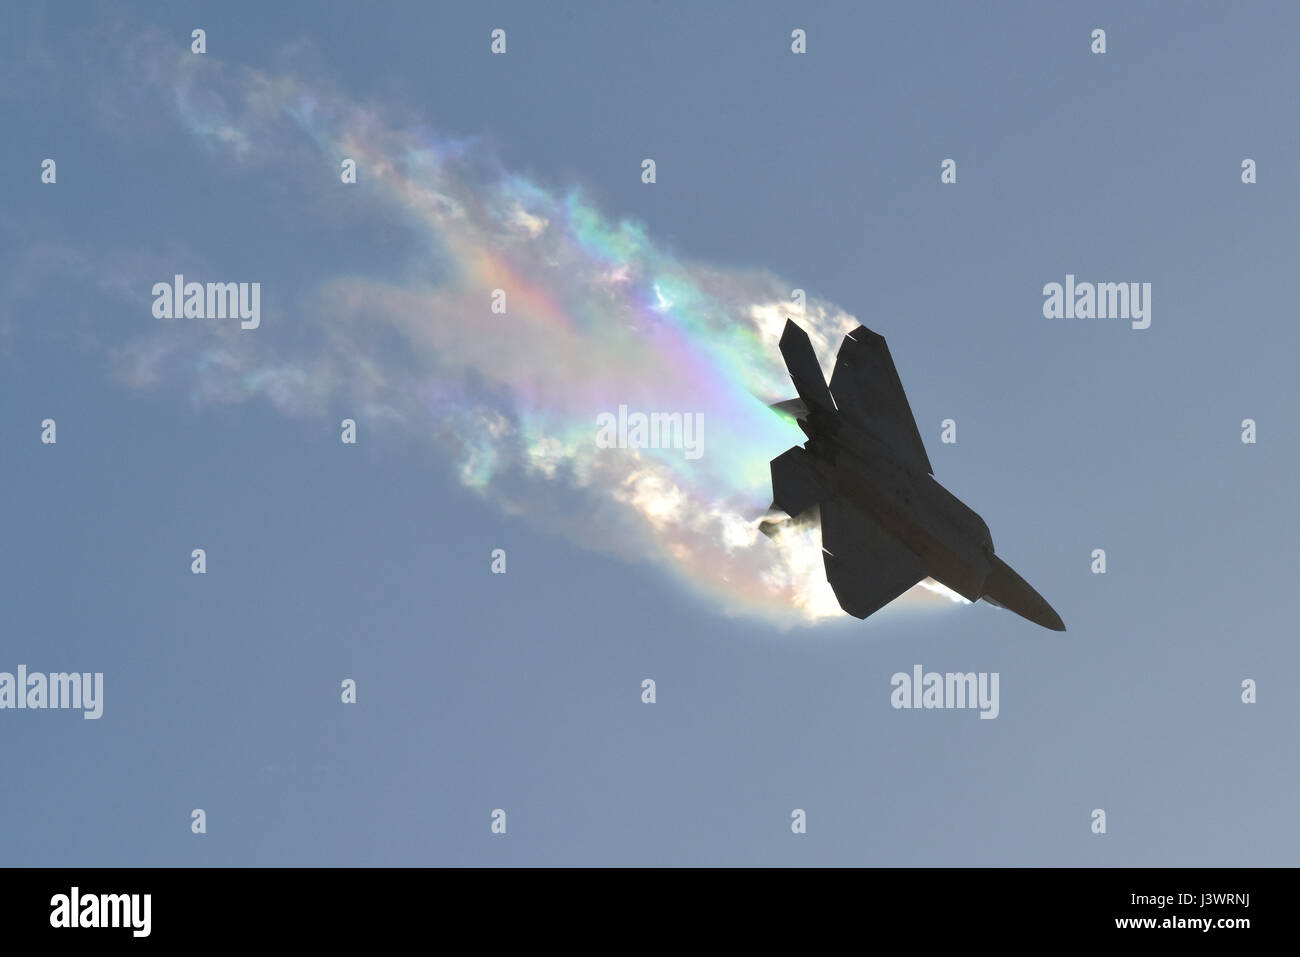 A USAF F-22 Raptor stealth tactical fighter aircraft causes massive vapor contrails in flight during the Australian Airshow and Aerospace & Defense Exposition March 3, 2017 in Geelong, Australia.    (photo by John Gordinier /US Air Force  via Planetpix) Stock Photo